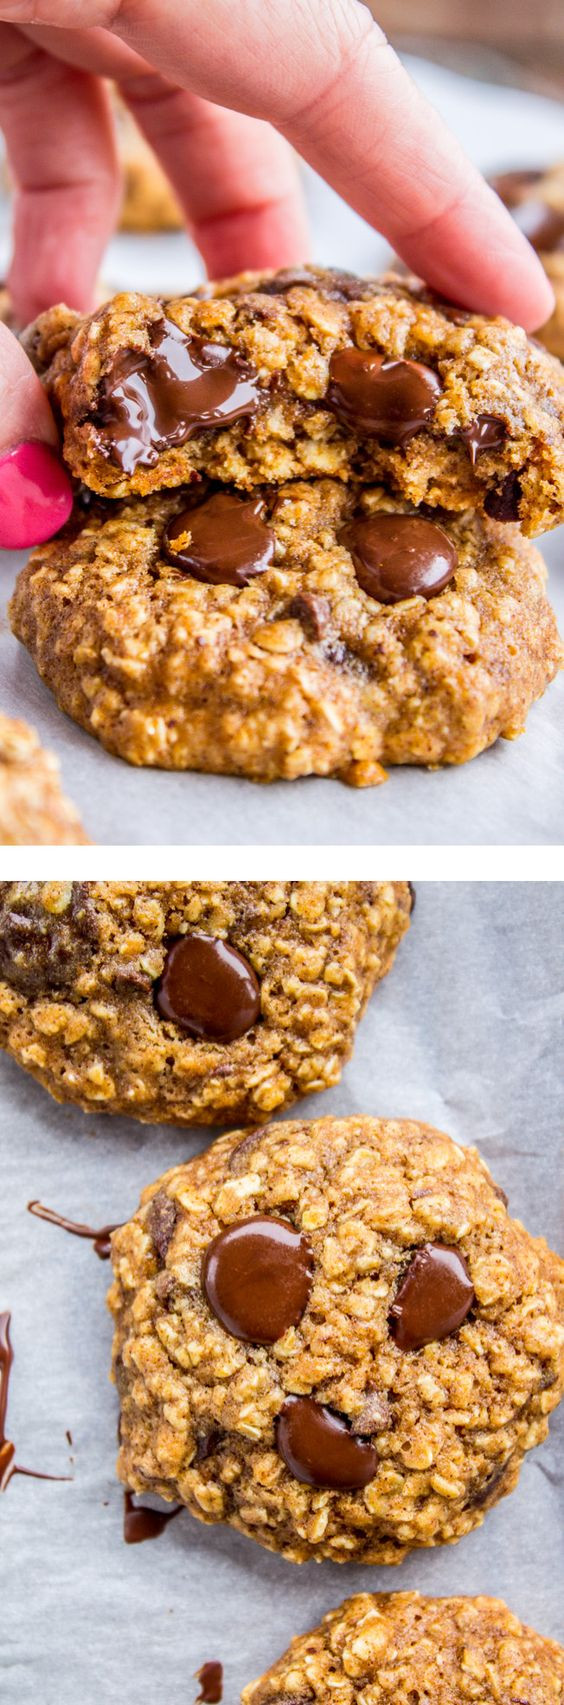 Oatmeal Chocolate Chip Cookies Healthy
 This recipe for healthy oatmeal chocolate chip cookies